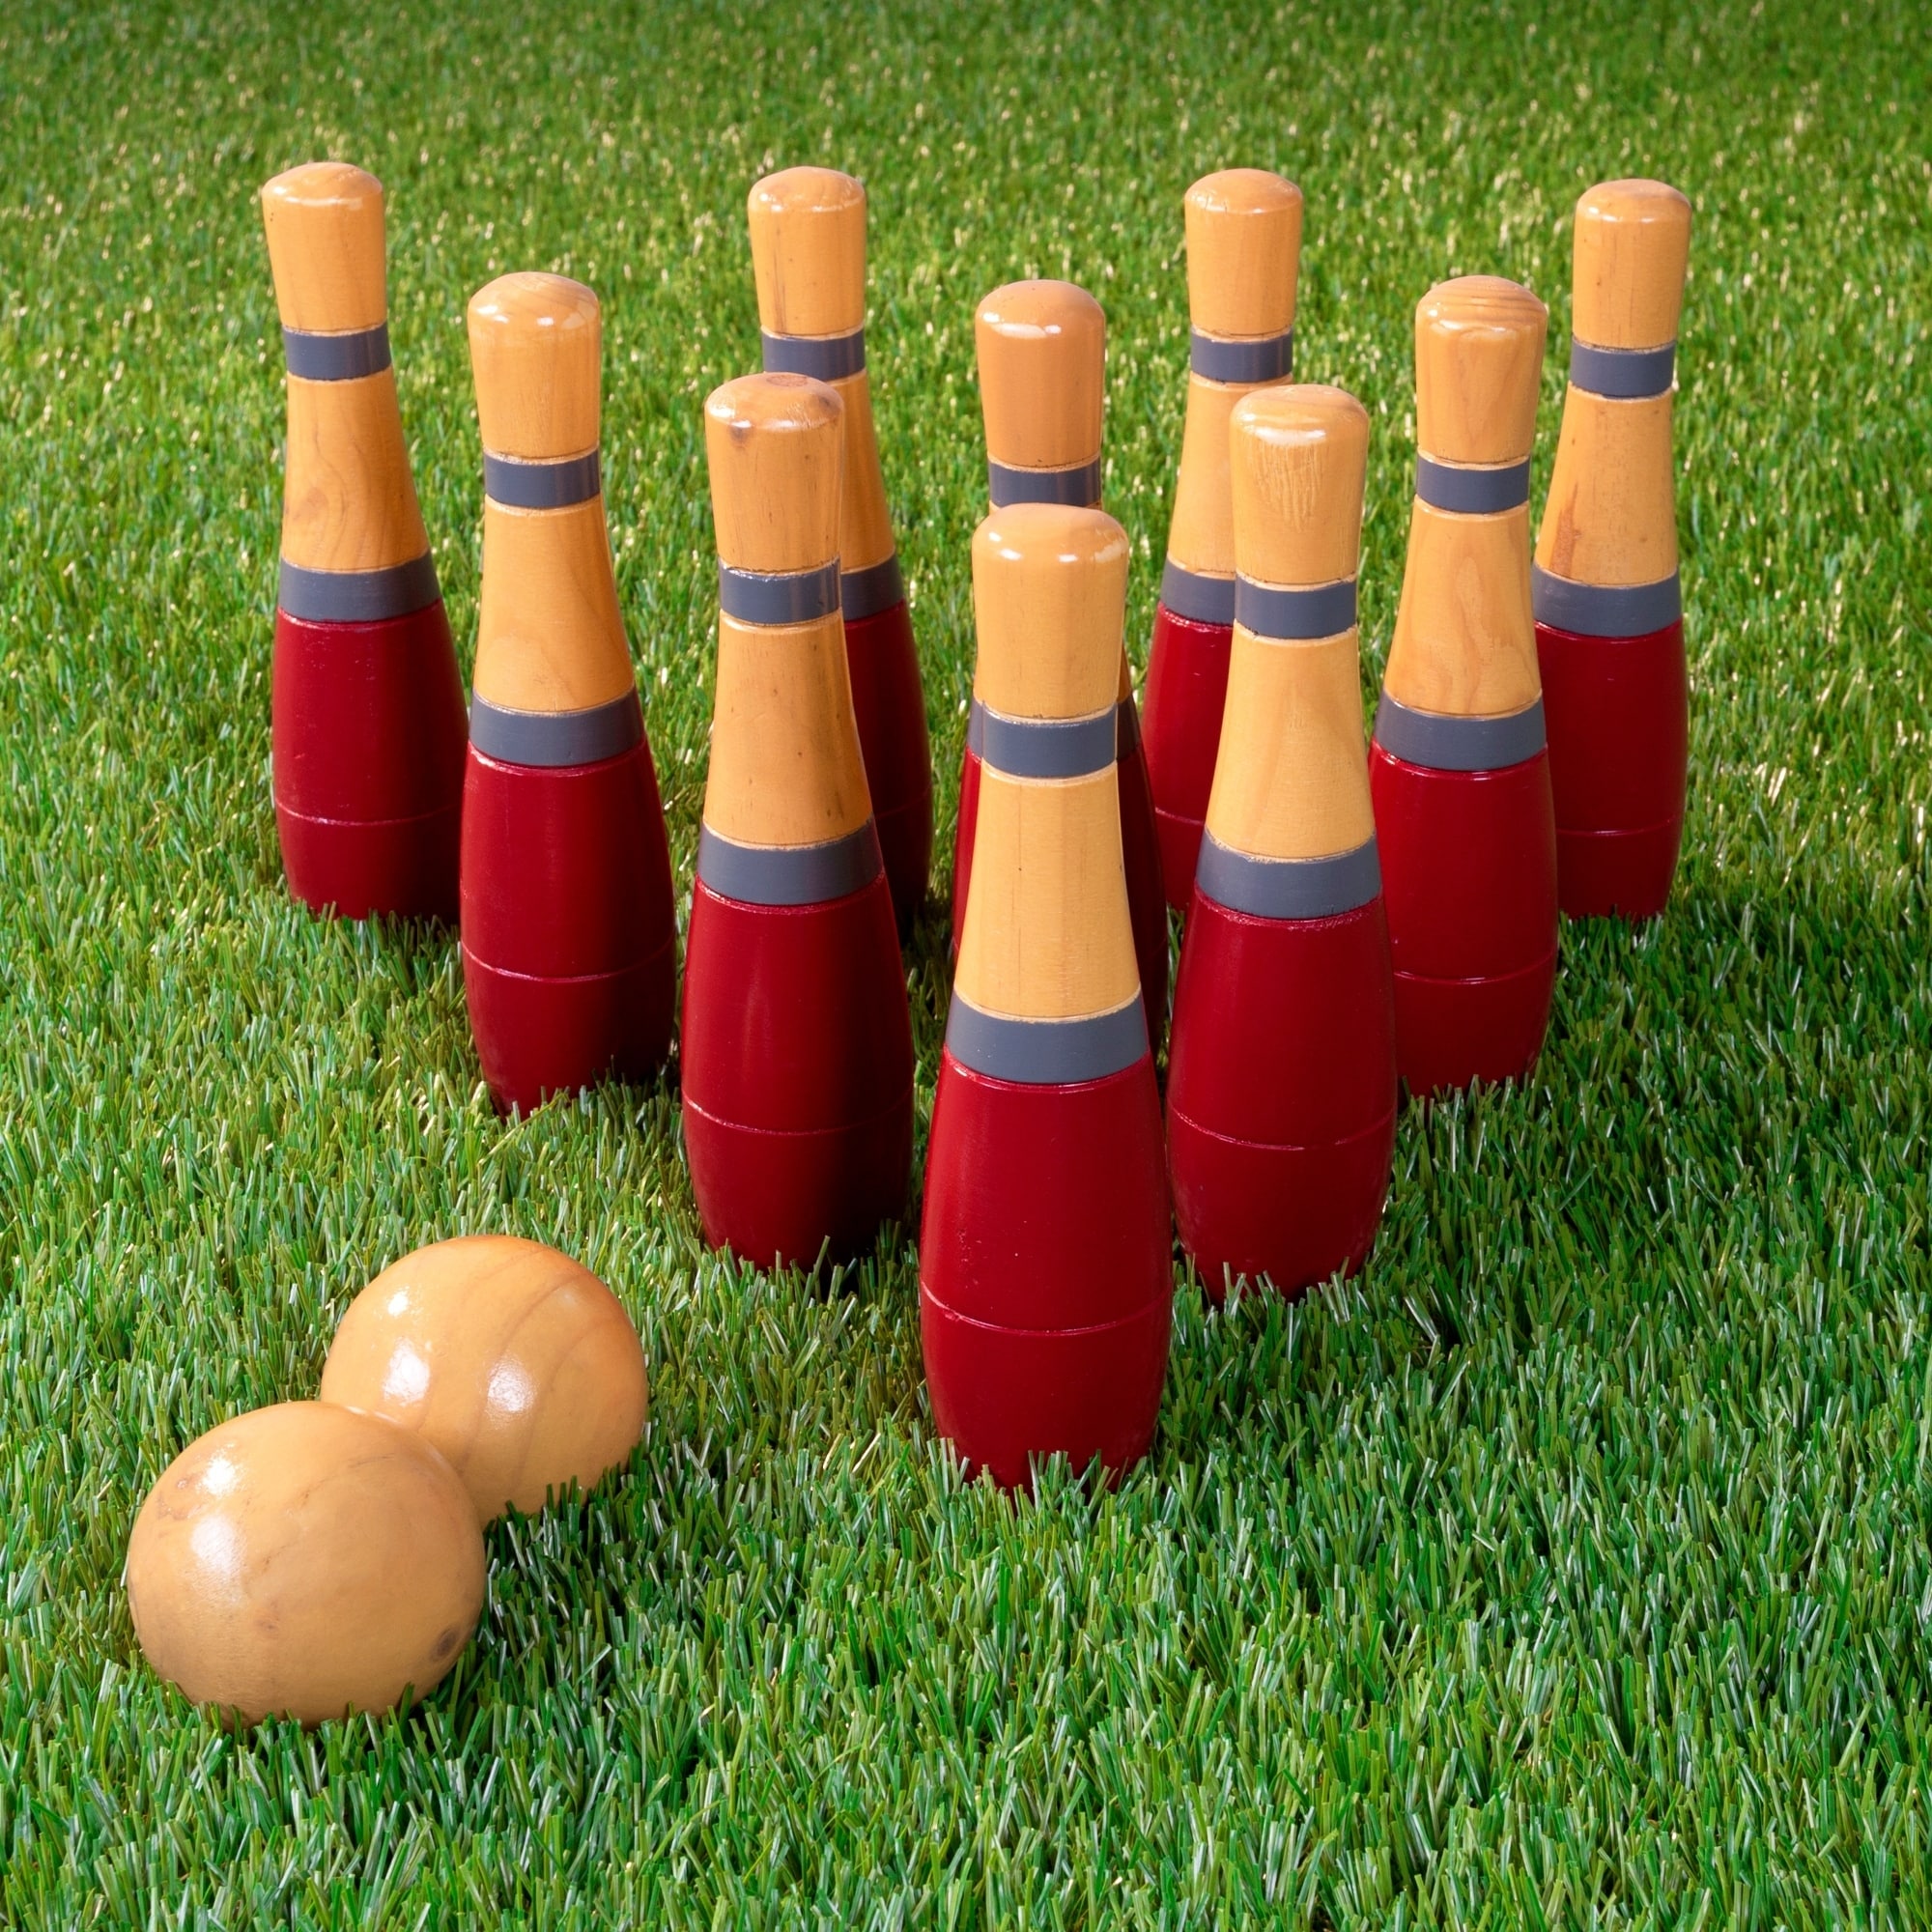 Lawn Bowling, 8 inch Wooden Lawn Game by Hey! Play! - Bed Bath and Beyond